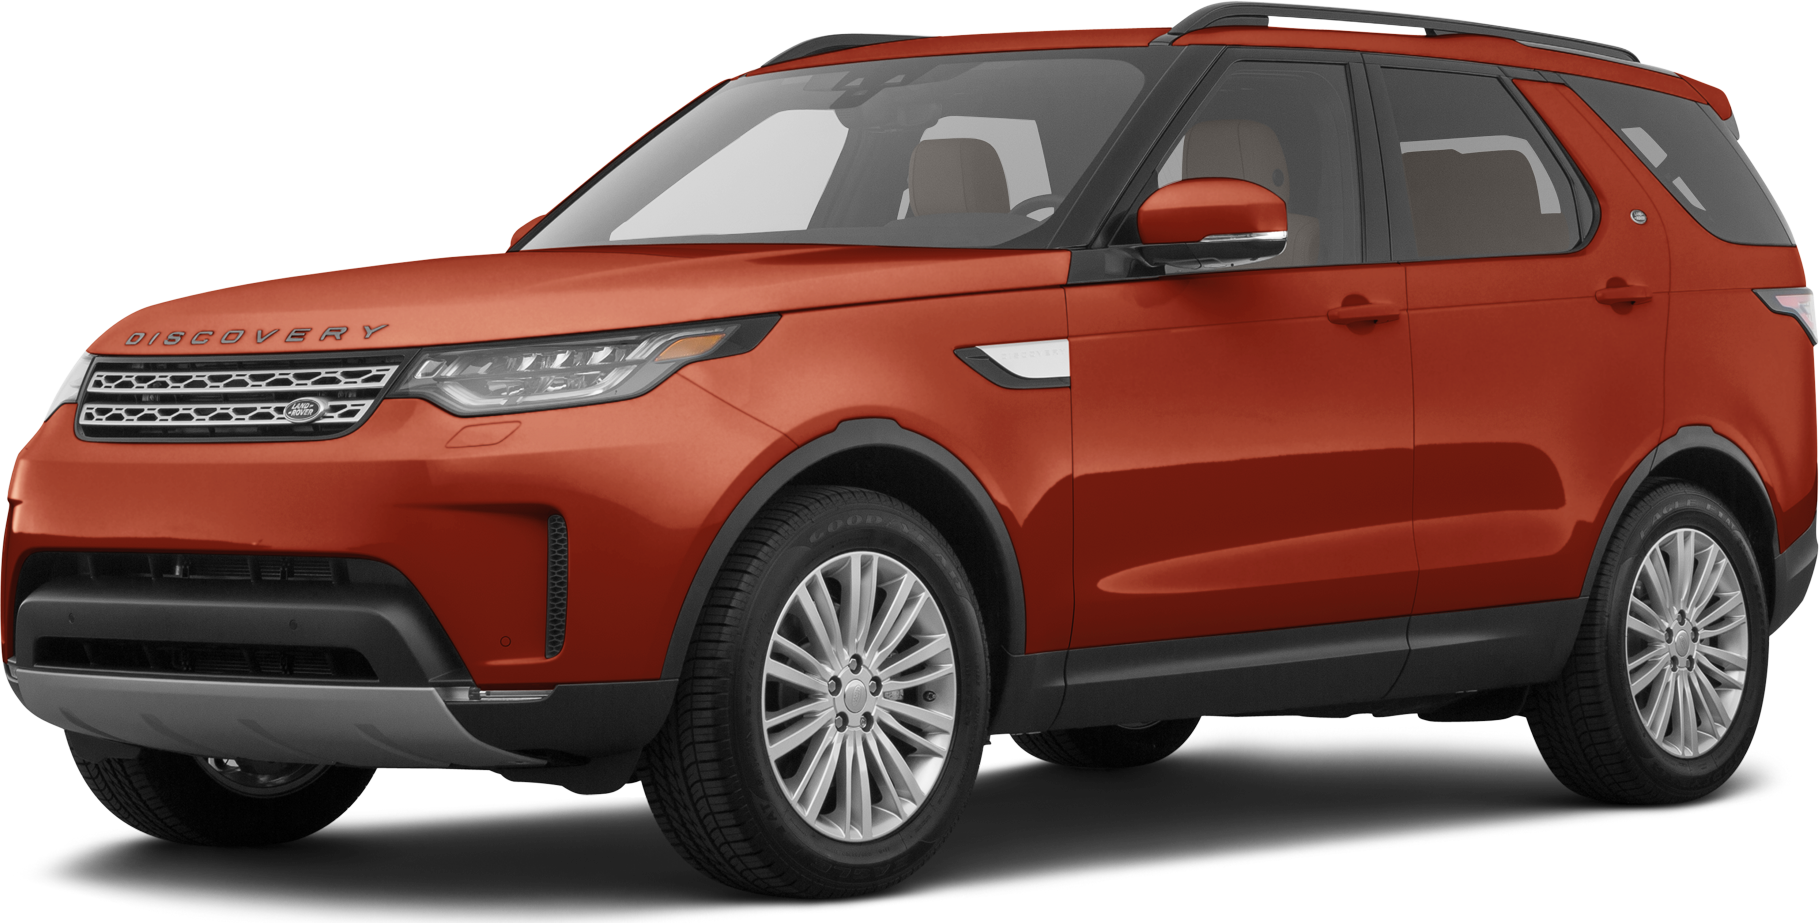 2019 Land Rover Discovery Sport Price, Value, Ratings & Reviews